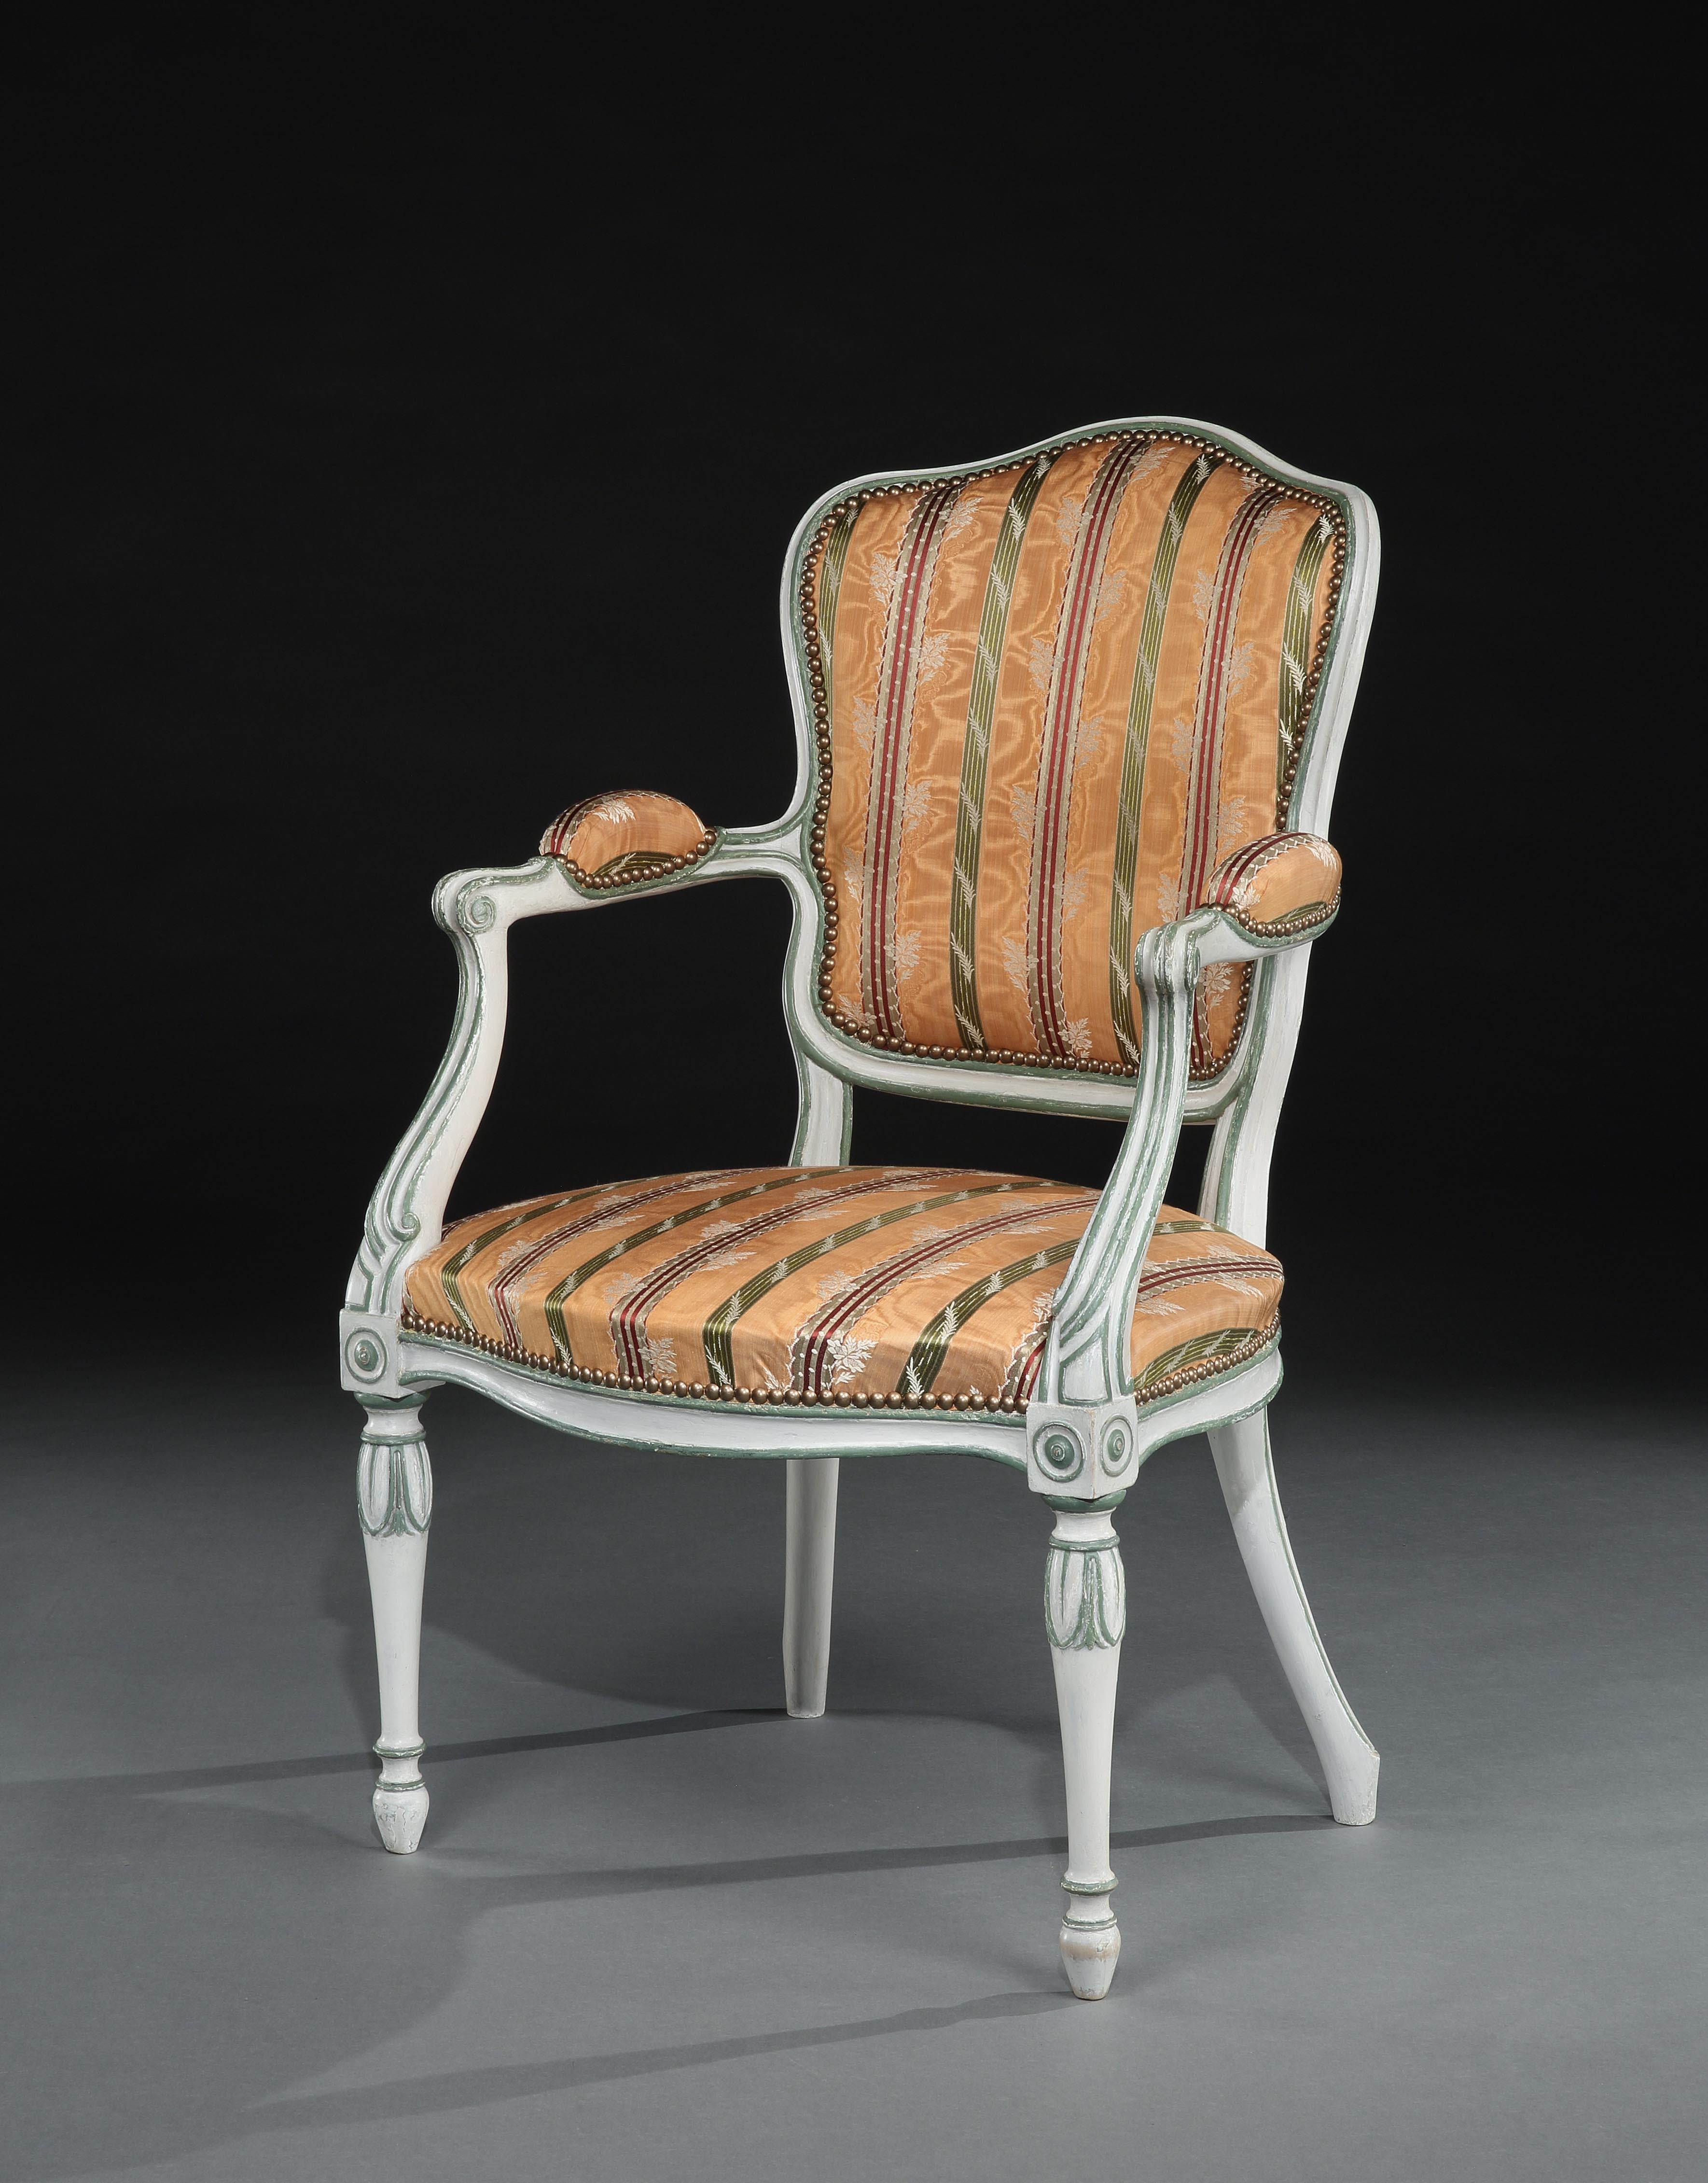 A fine George III painted open armchair in the French Hepplewhite taste. The shield shaped back, serpentine seat and arm-rests upholstered. The chair frame with channeled detailing painted off-white with green highlights. The shield shaped back with